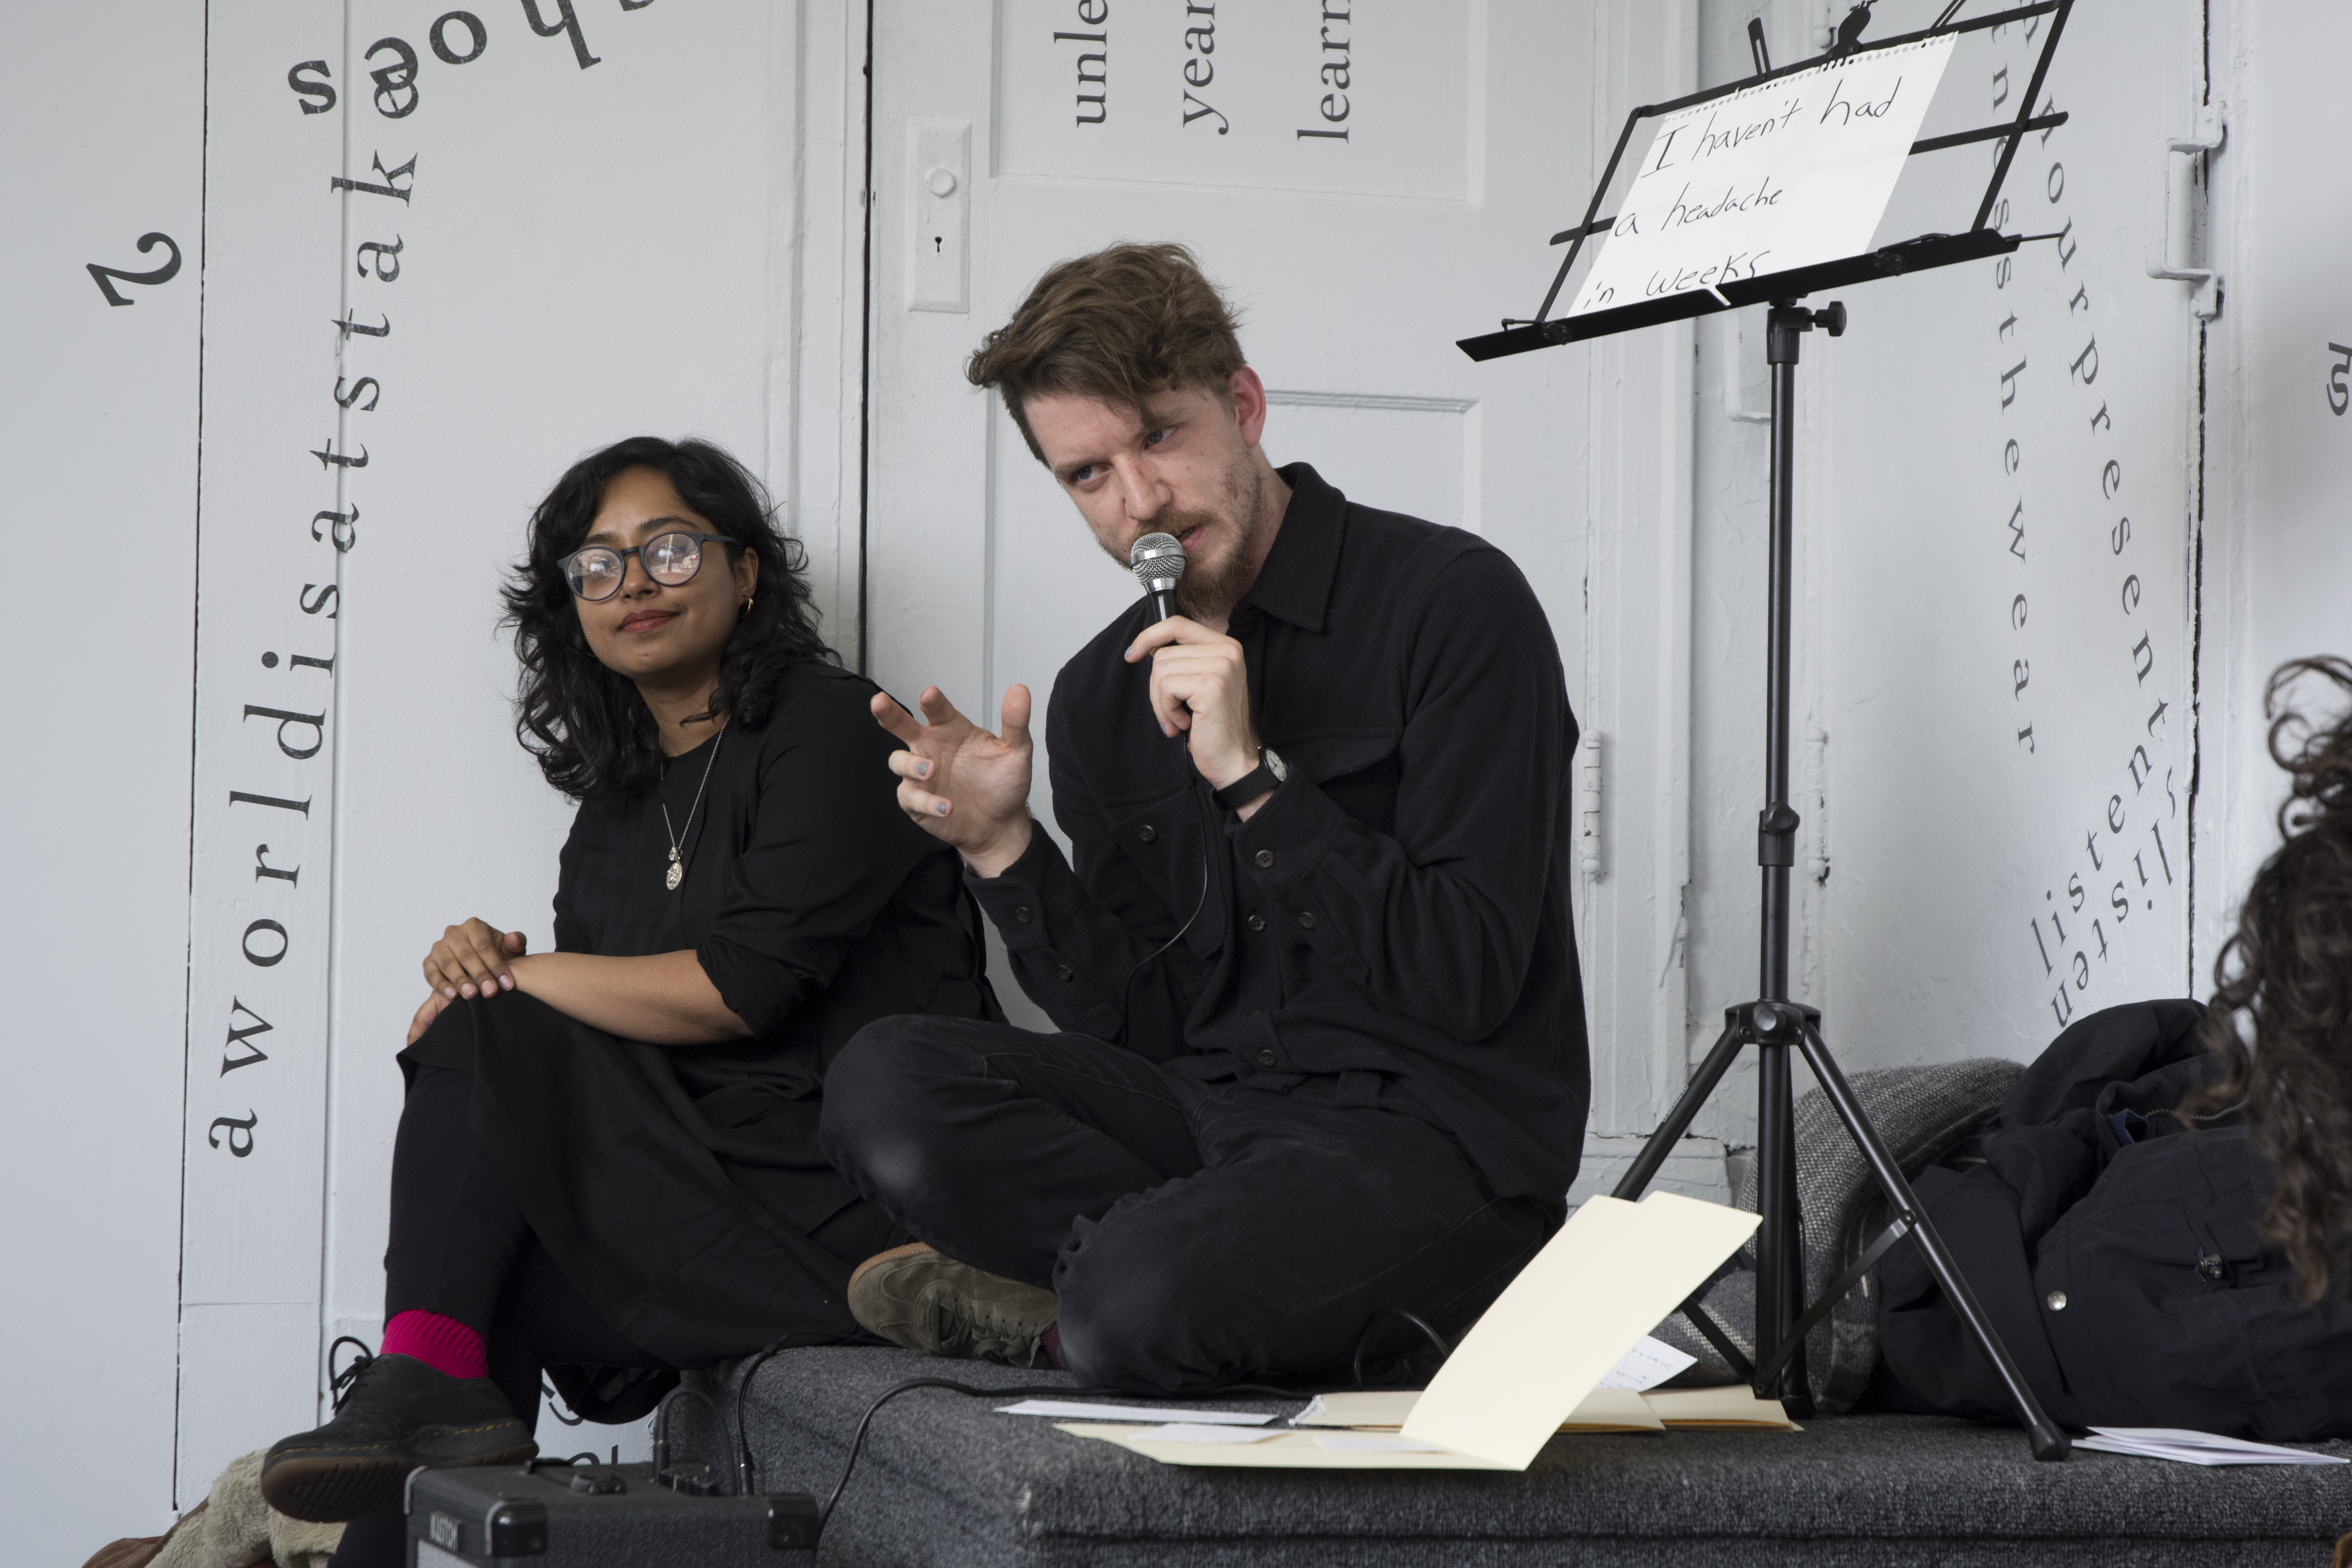 The performer and artist sit on a step in one of the gallery’s corners. Ethan speaks into a microphone while gesturing with the other hand. Above Ethan, on the right side of the frame, is a music stand holding a piece of notebook paper that reads, “I haven’t had a headache in weeks” (handwritten in black marker). Udita sits on the left side of the frame, looking toward the camera; her glasses reflect the light. Behind them are white walls and a white door onto which black vinyl letters are directly installed, in the form of words and phrases in English (including “aworldisatstake” and “listen”). Text appears in different sizes and spatial orientations (e.g., right-side up, upside-down, diagonal, vertical, and organic shapes), with some words/phrases expanded in space, condensed, or intersecting with other text.